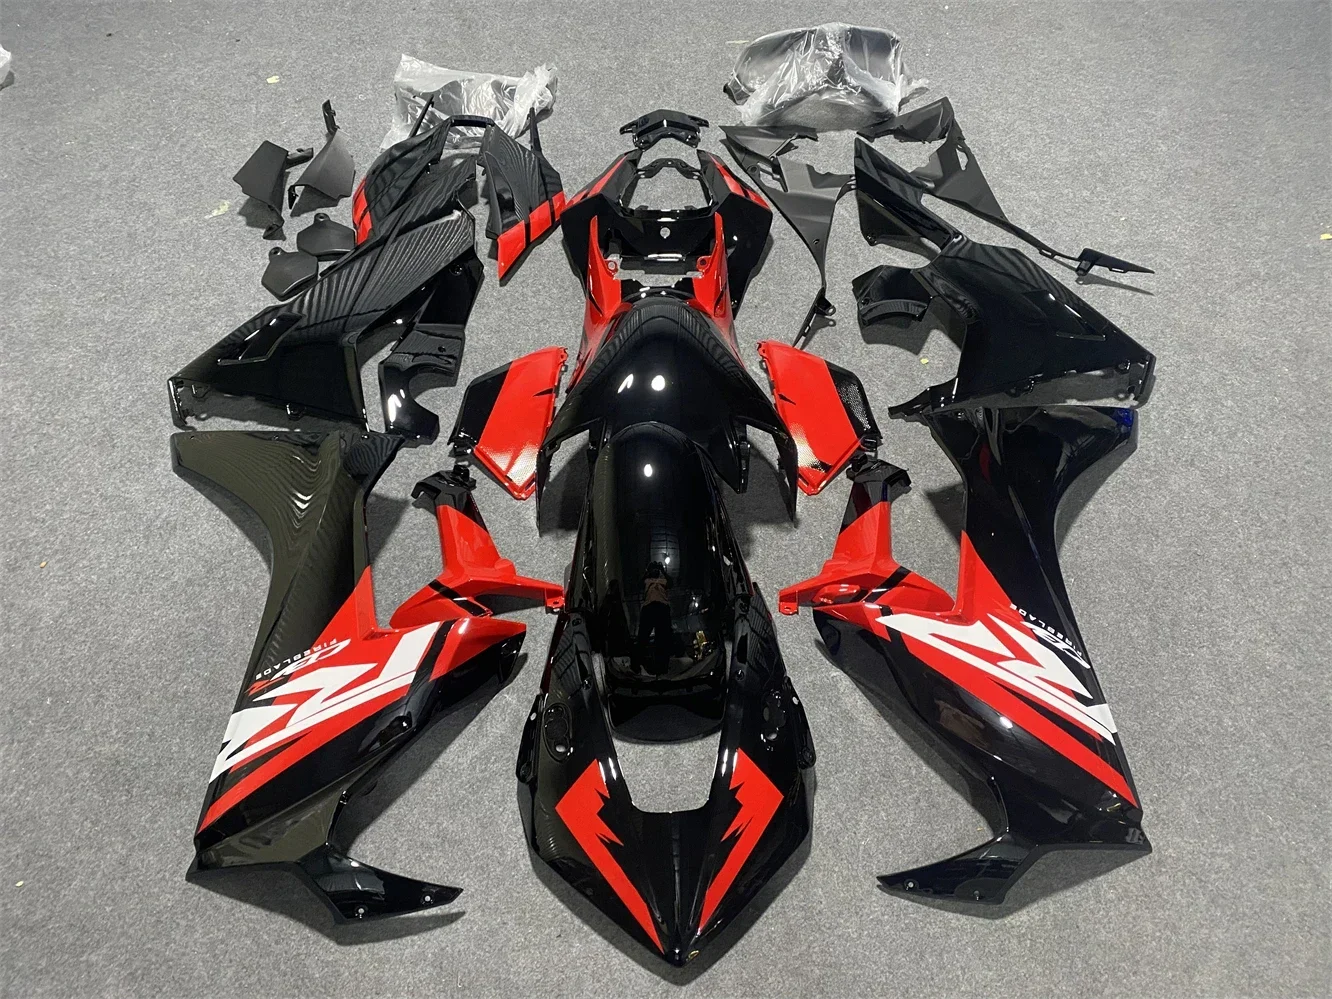 

Suitable for CBR1000RR 17-19 Years CBR1000 2017 2018 2019 Fairing Red Black Blue